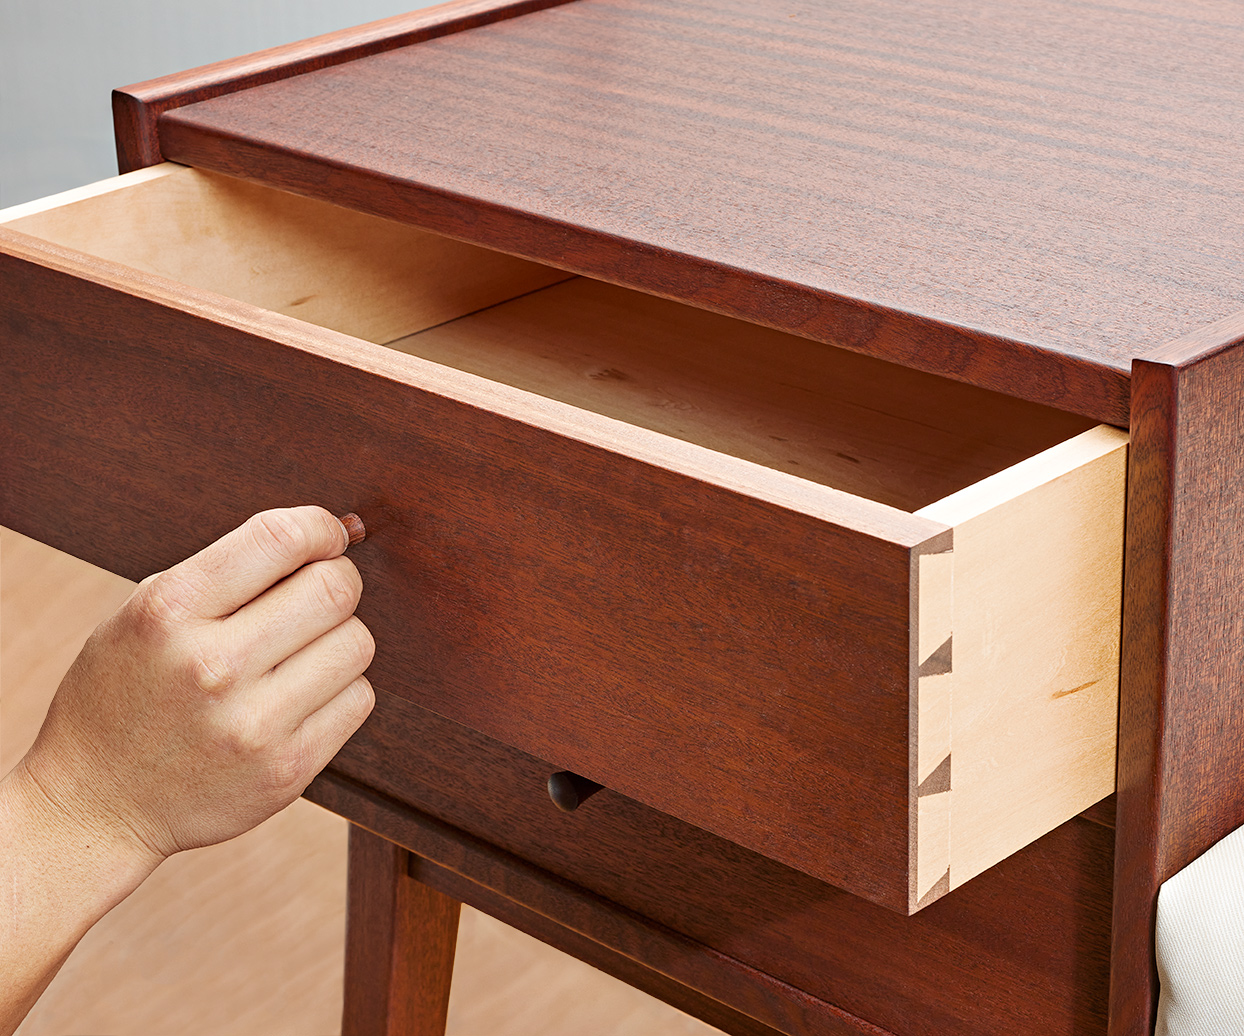 Drawer - Construction - Wield and lock - movement